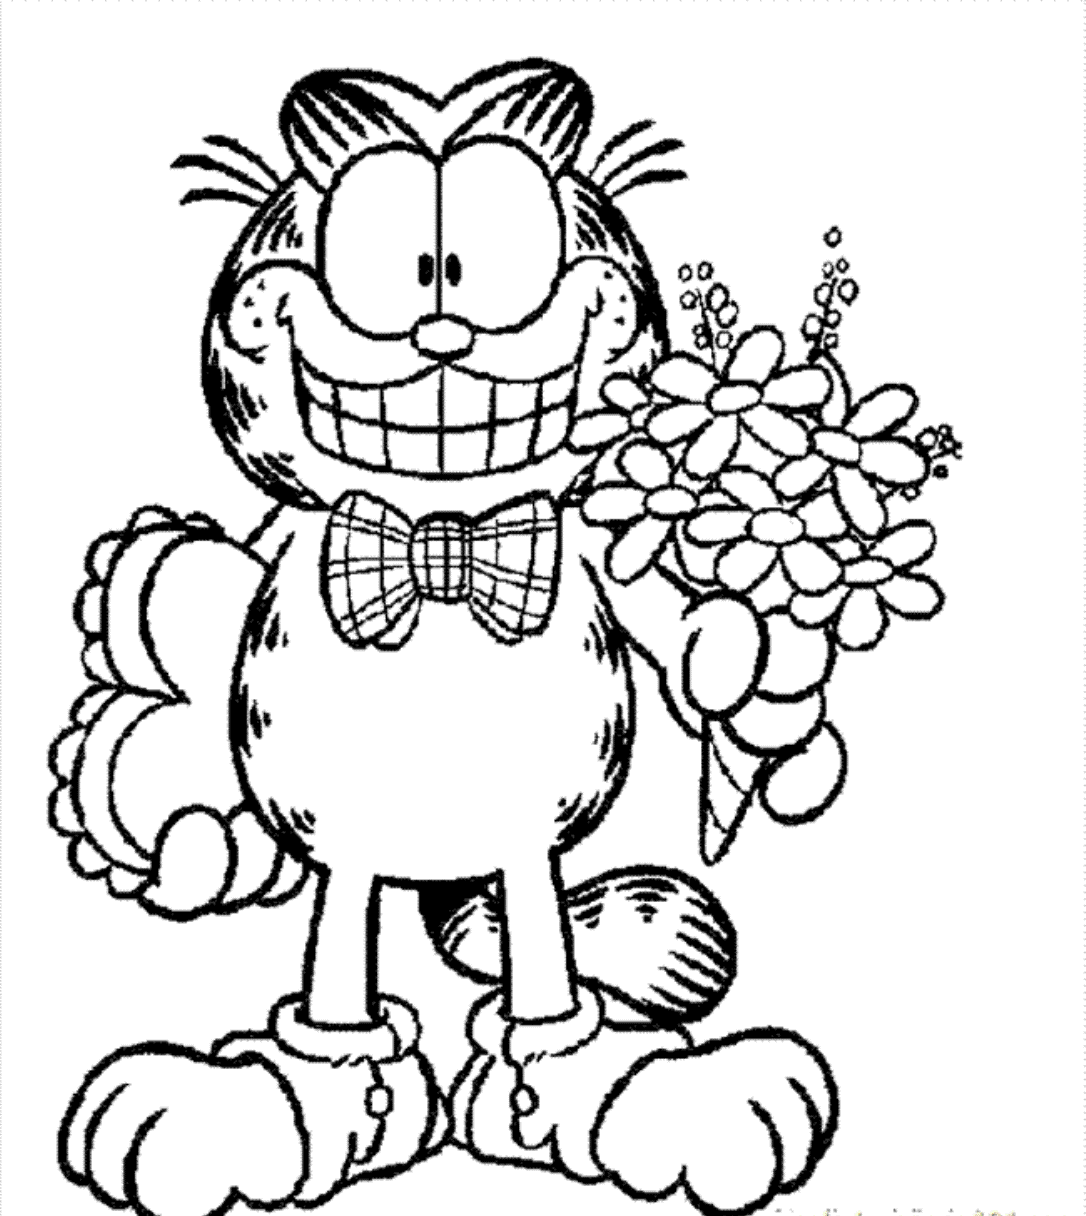 garfield comics coloring pages - photo #7